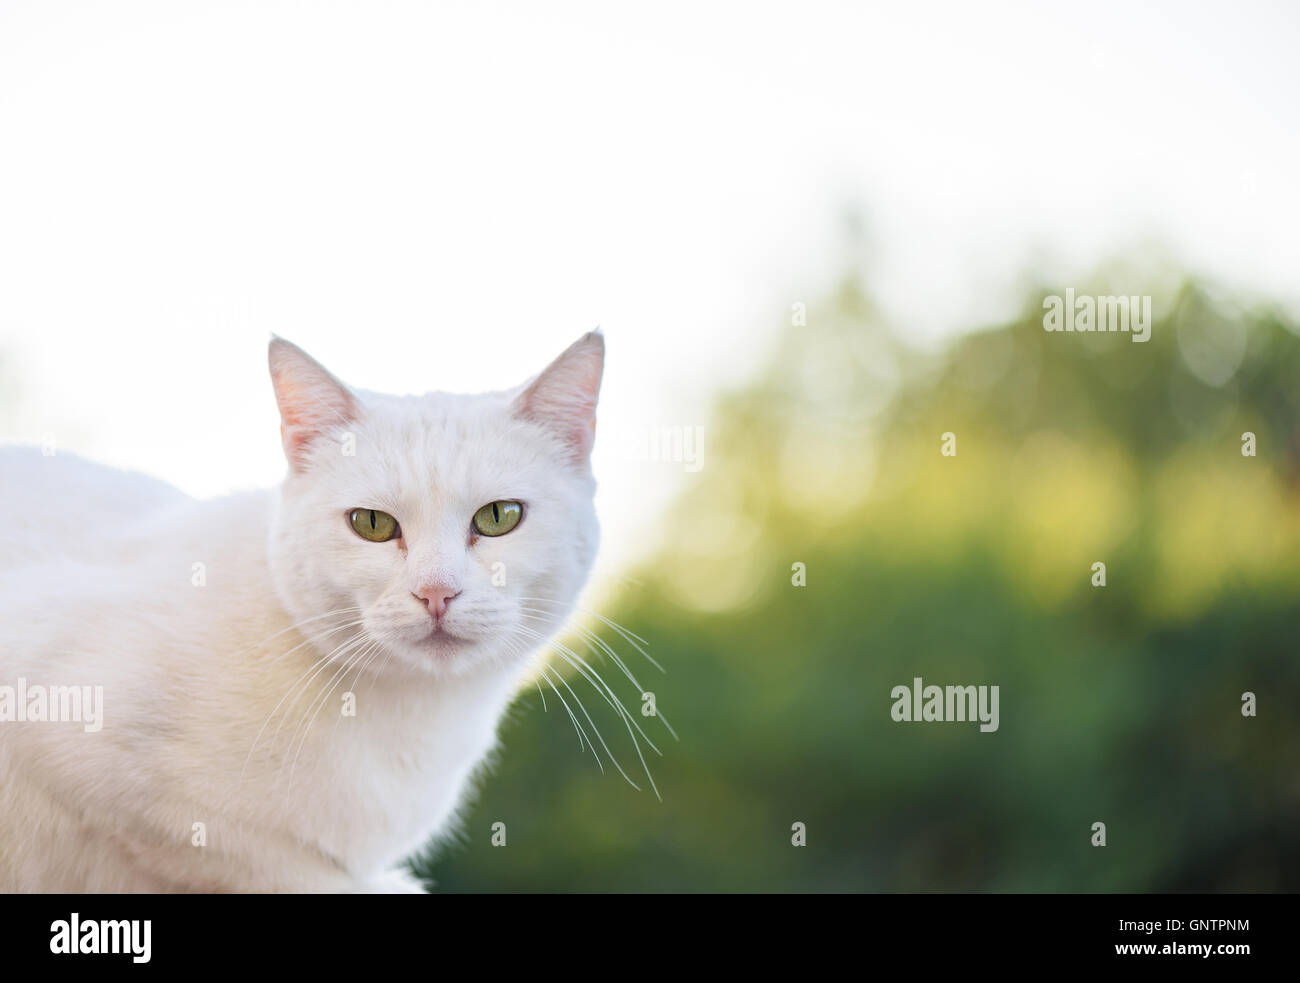 White cat with green eyes looking towards camera Stock Photo